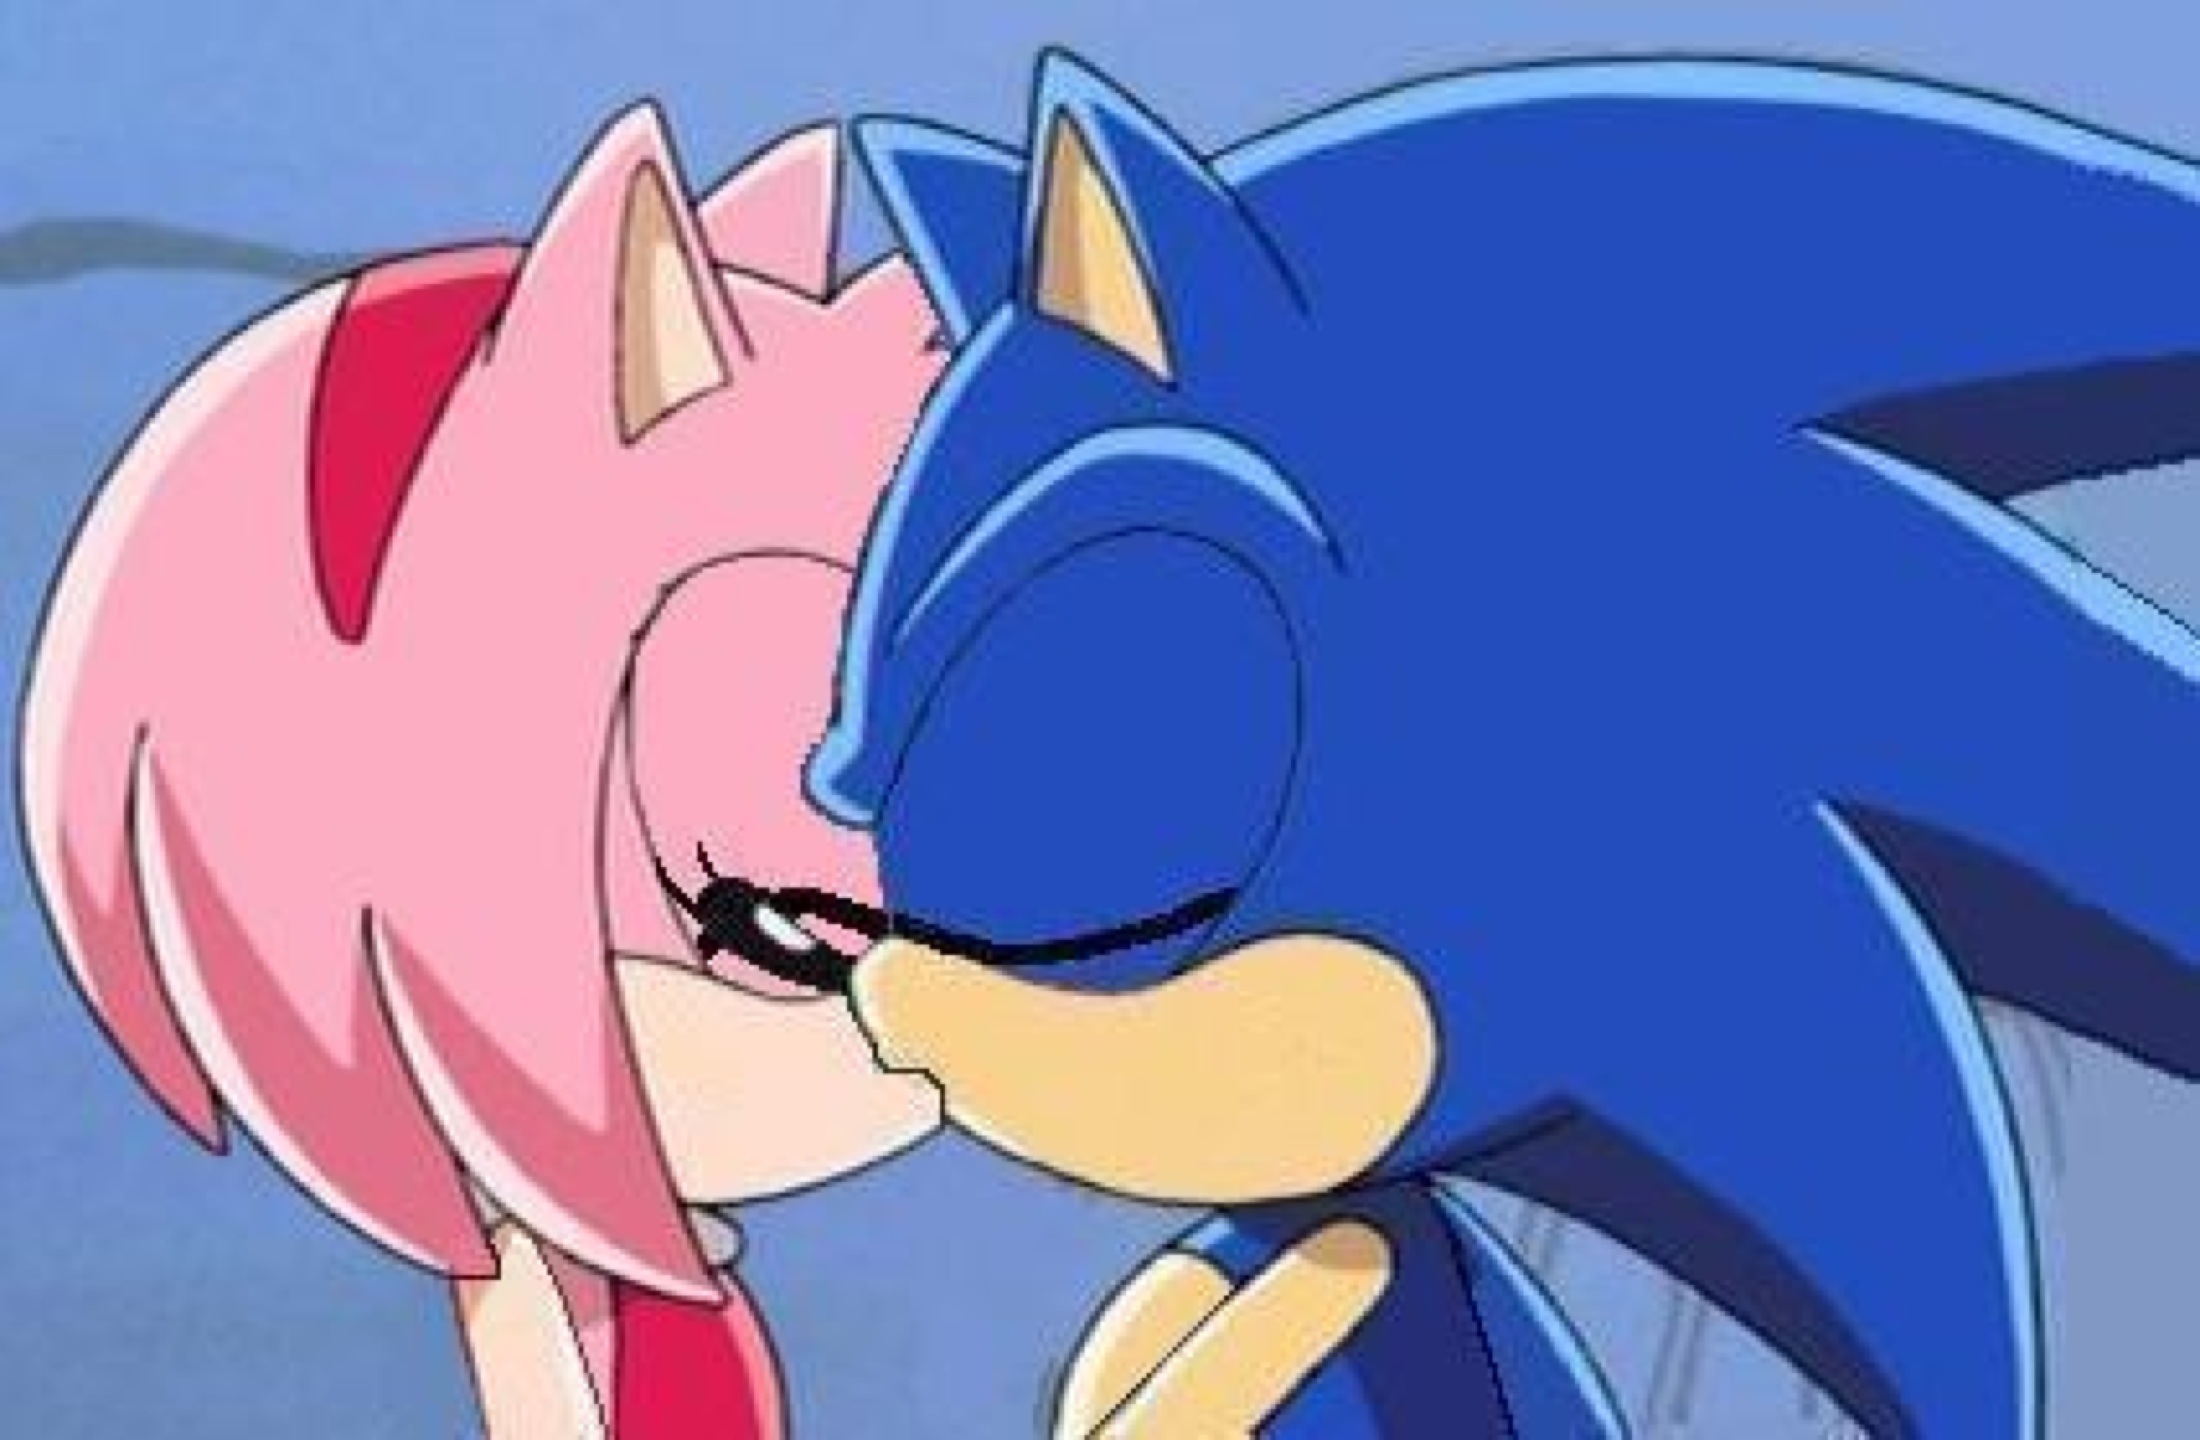 sonamy Kiss - Sonic The Hedgehog and His Friends photo (17804200